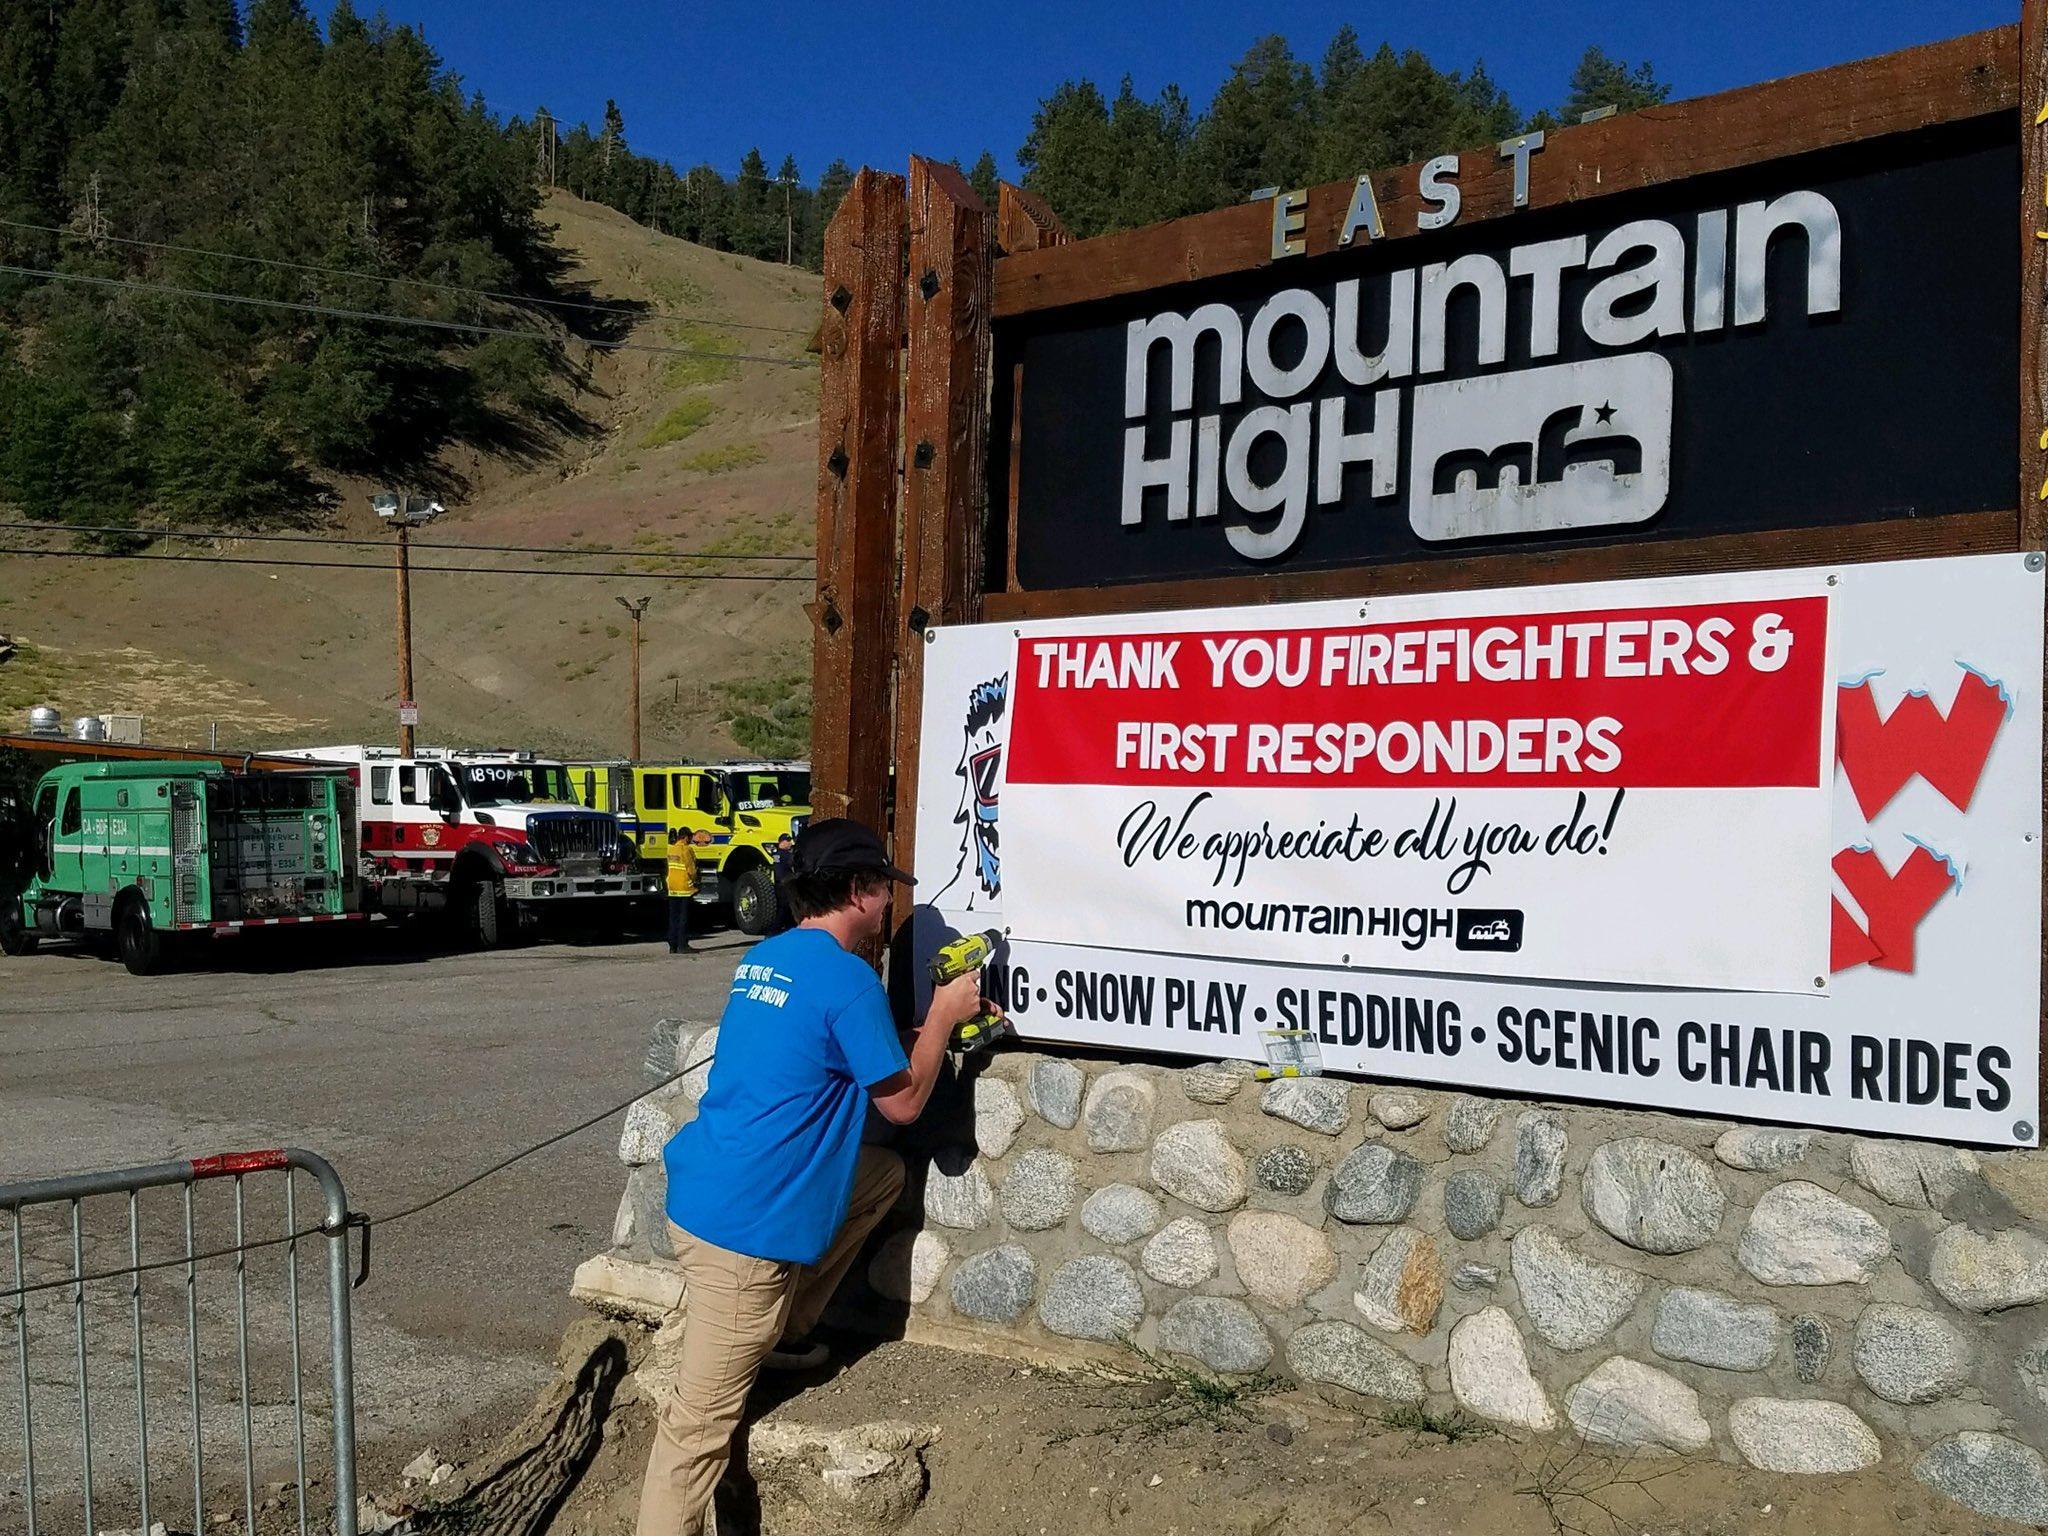 Appreciation for Firefighters. Courtesy of Mtn. High Resort